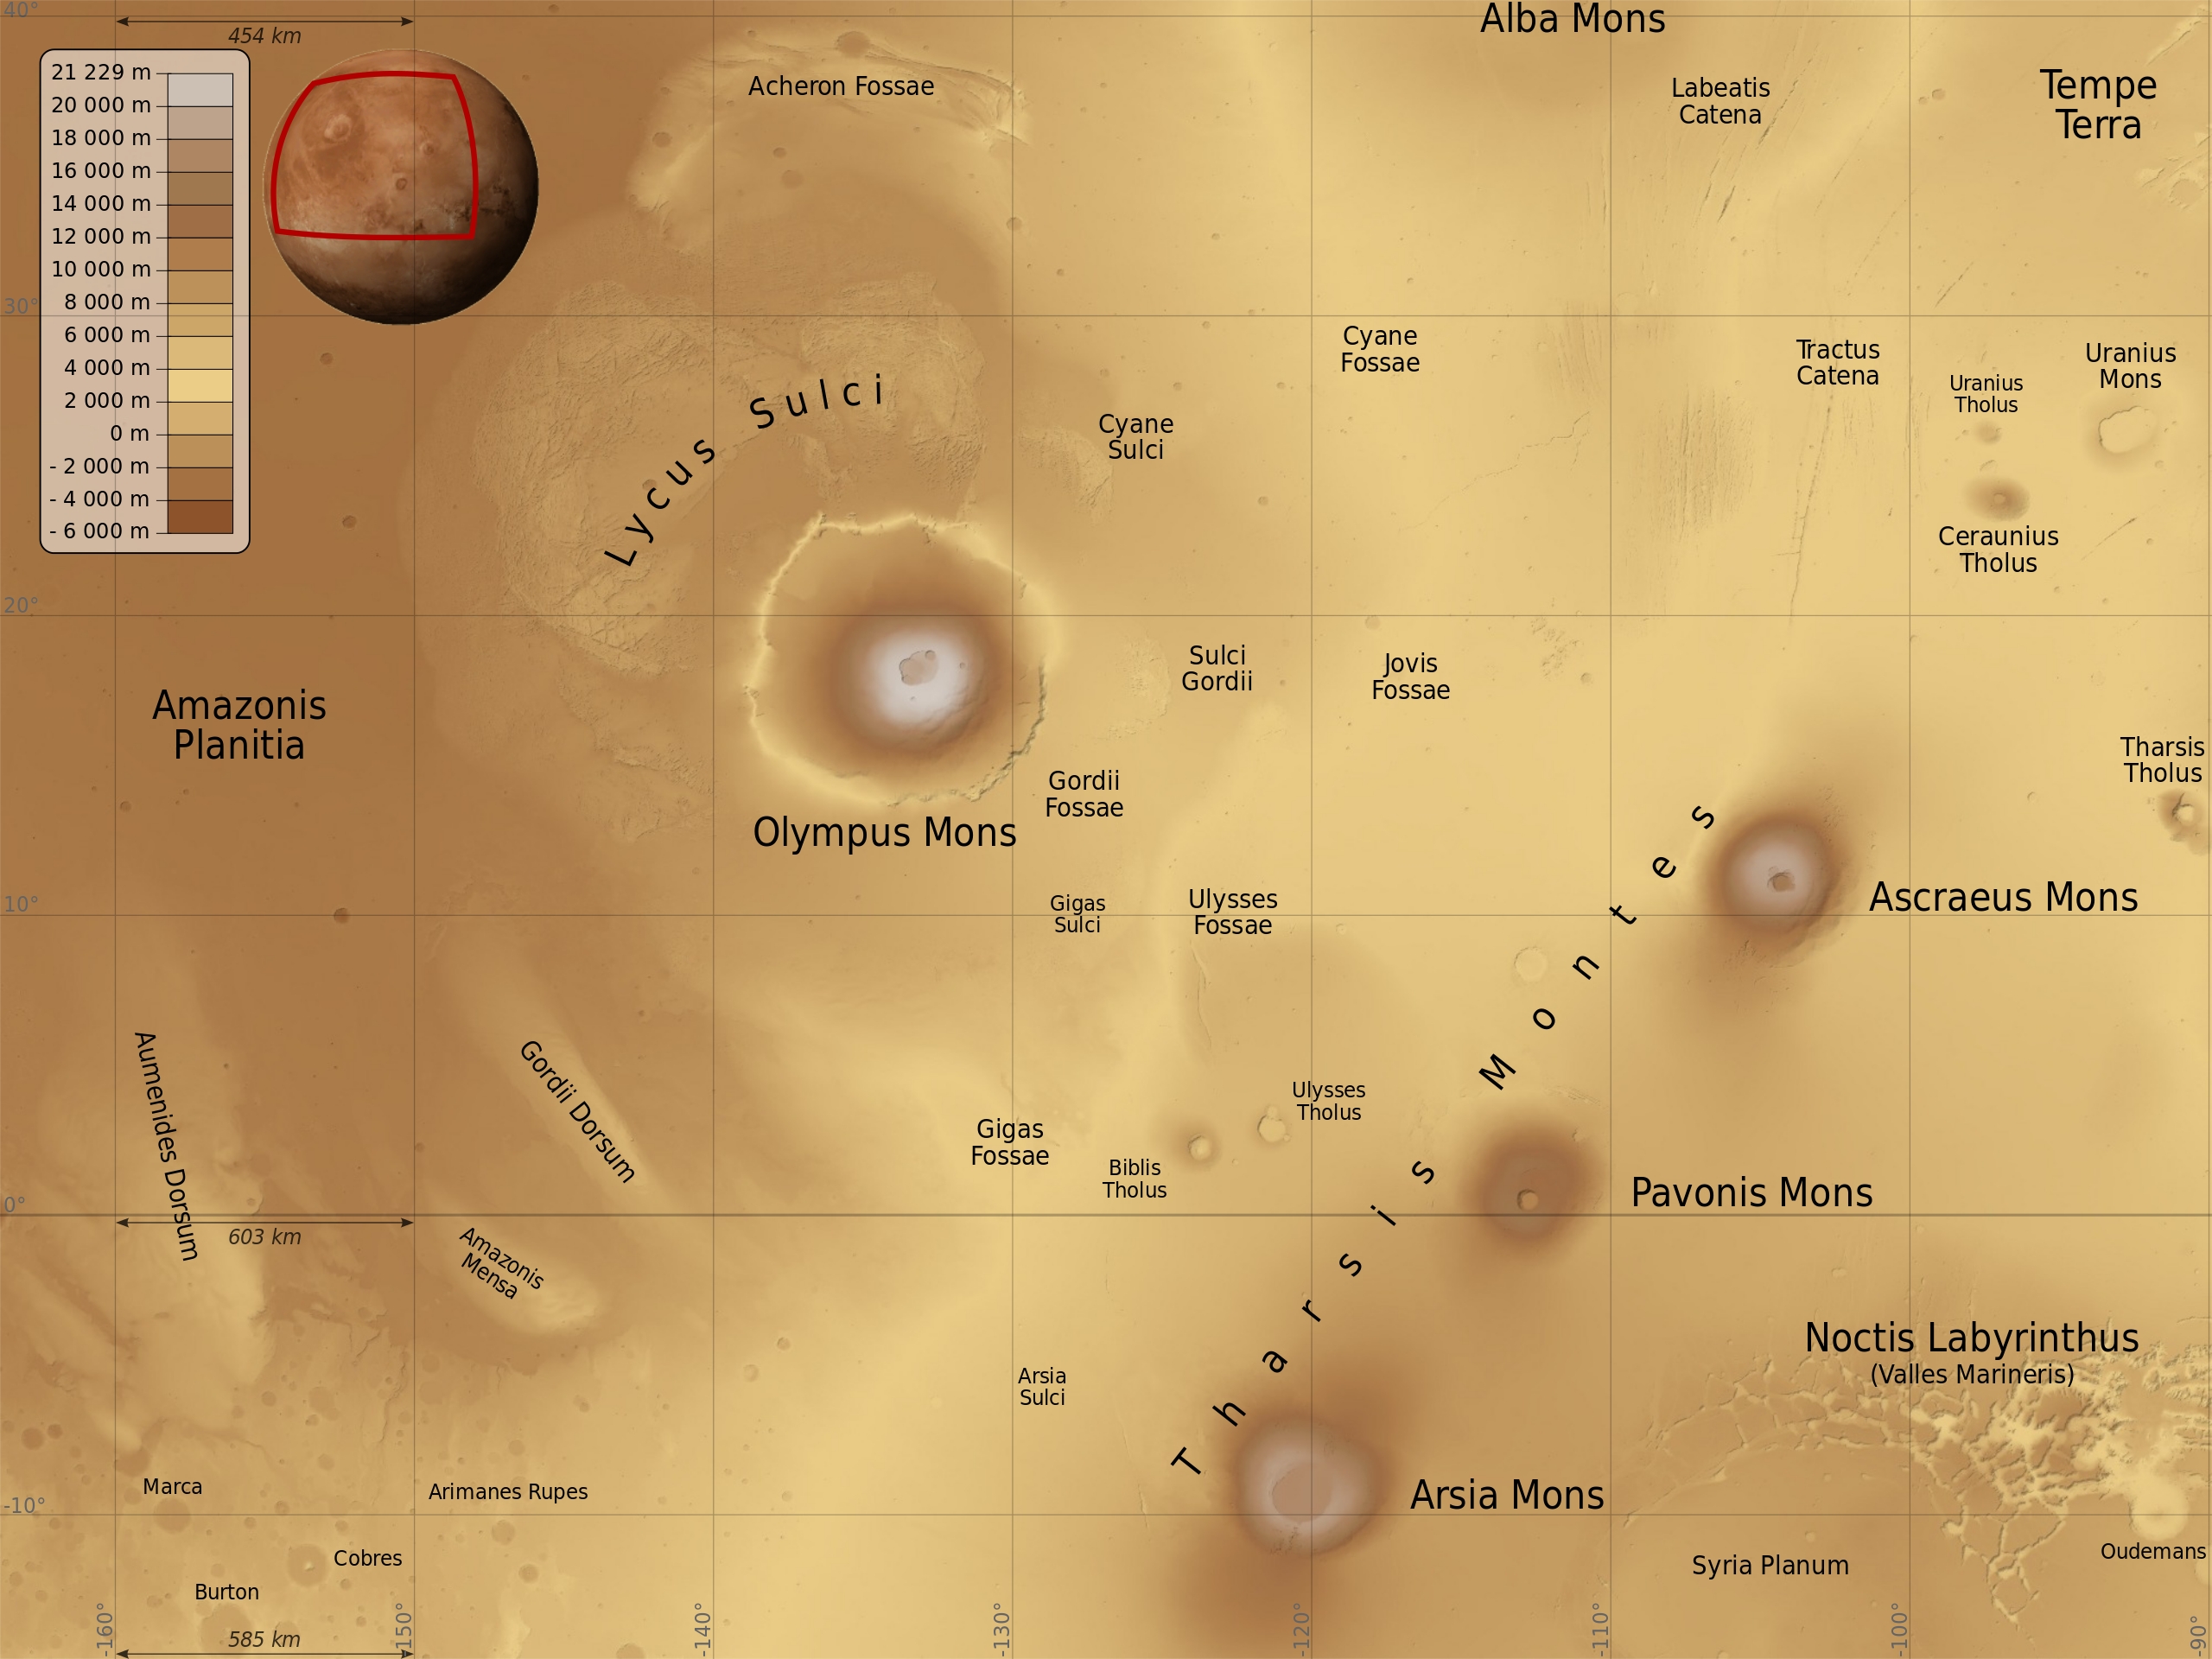 For the first time, water frost was observed near the equator of Mars